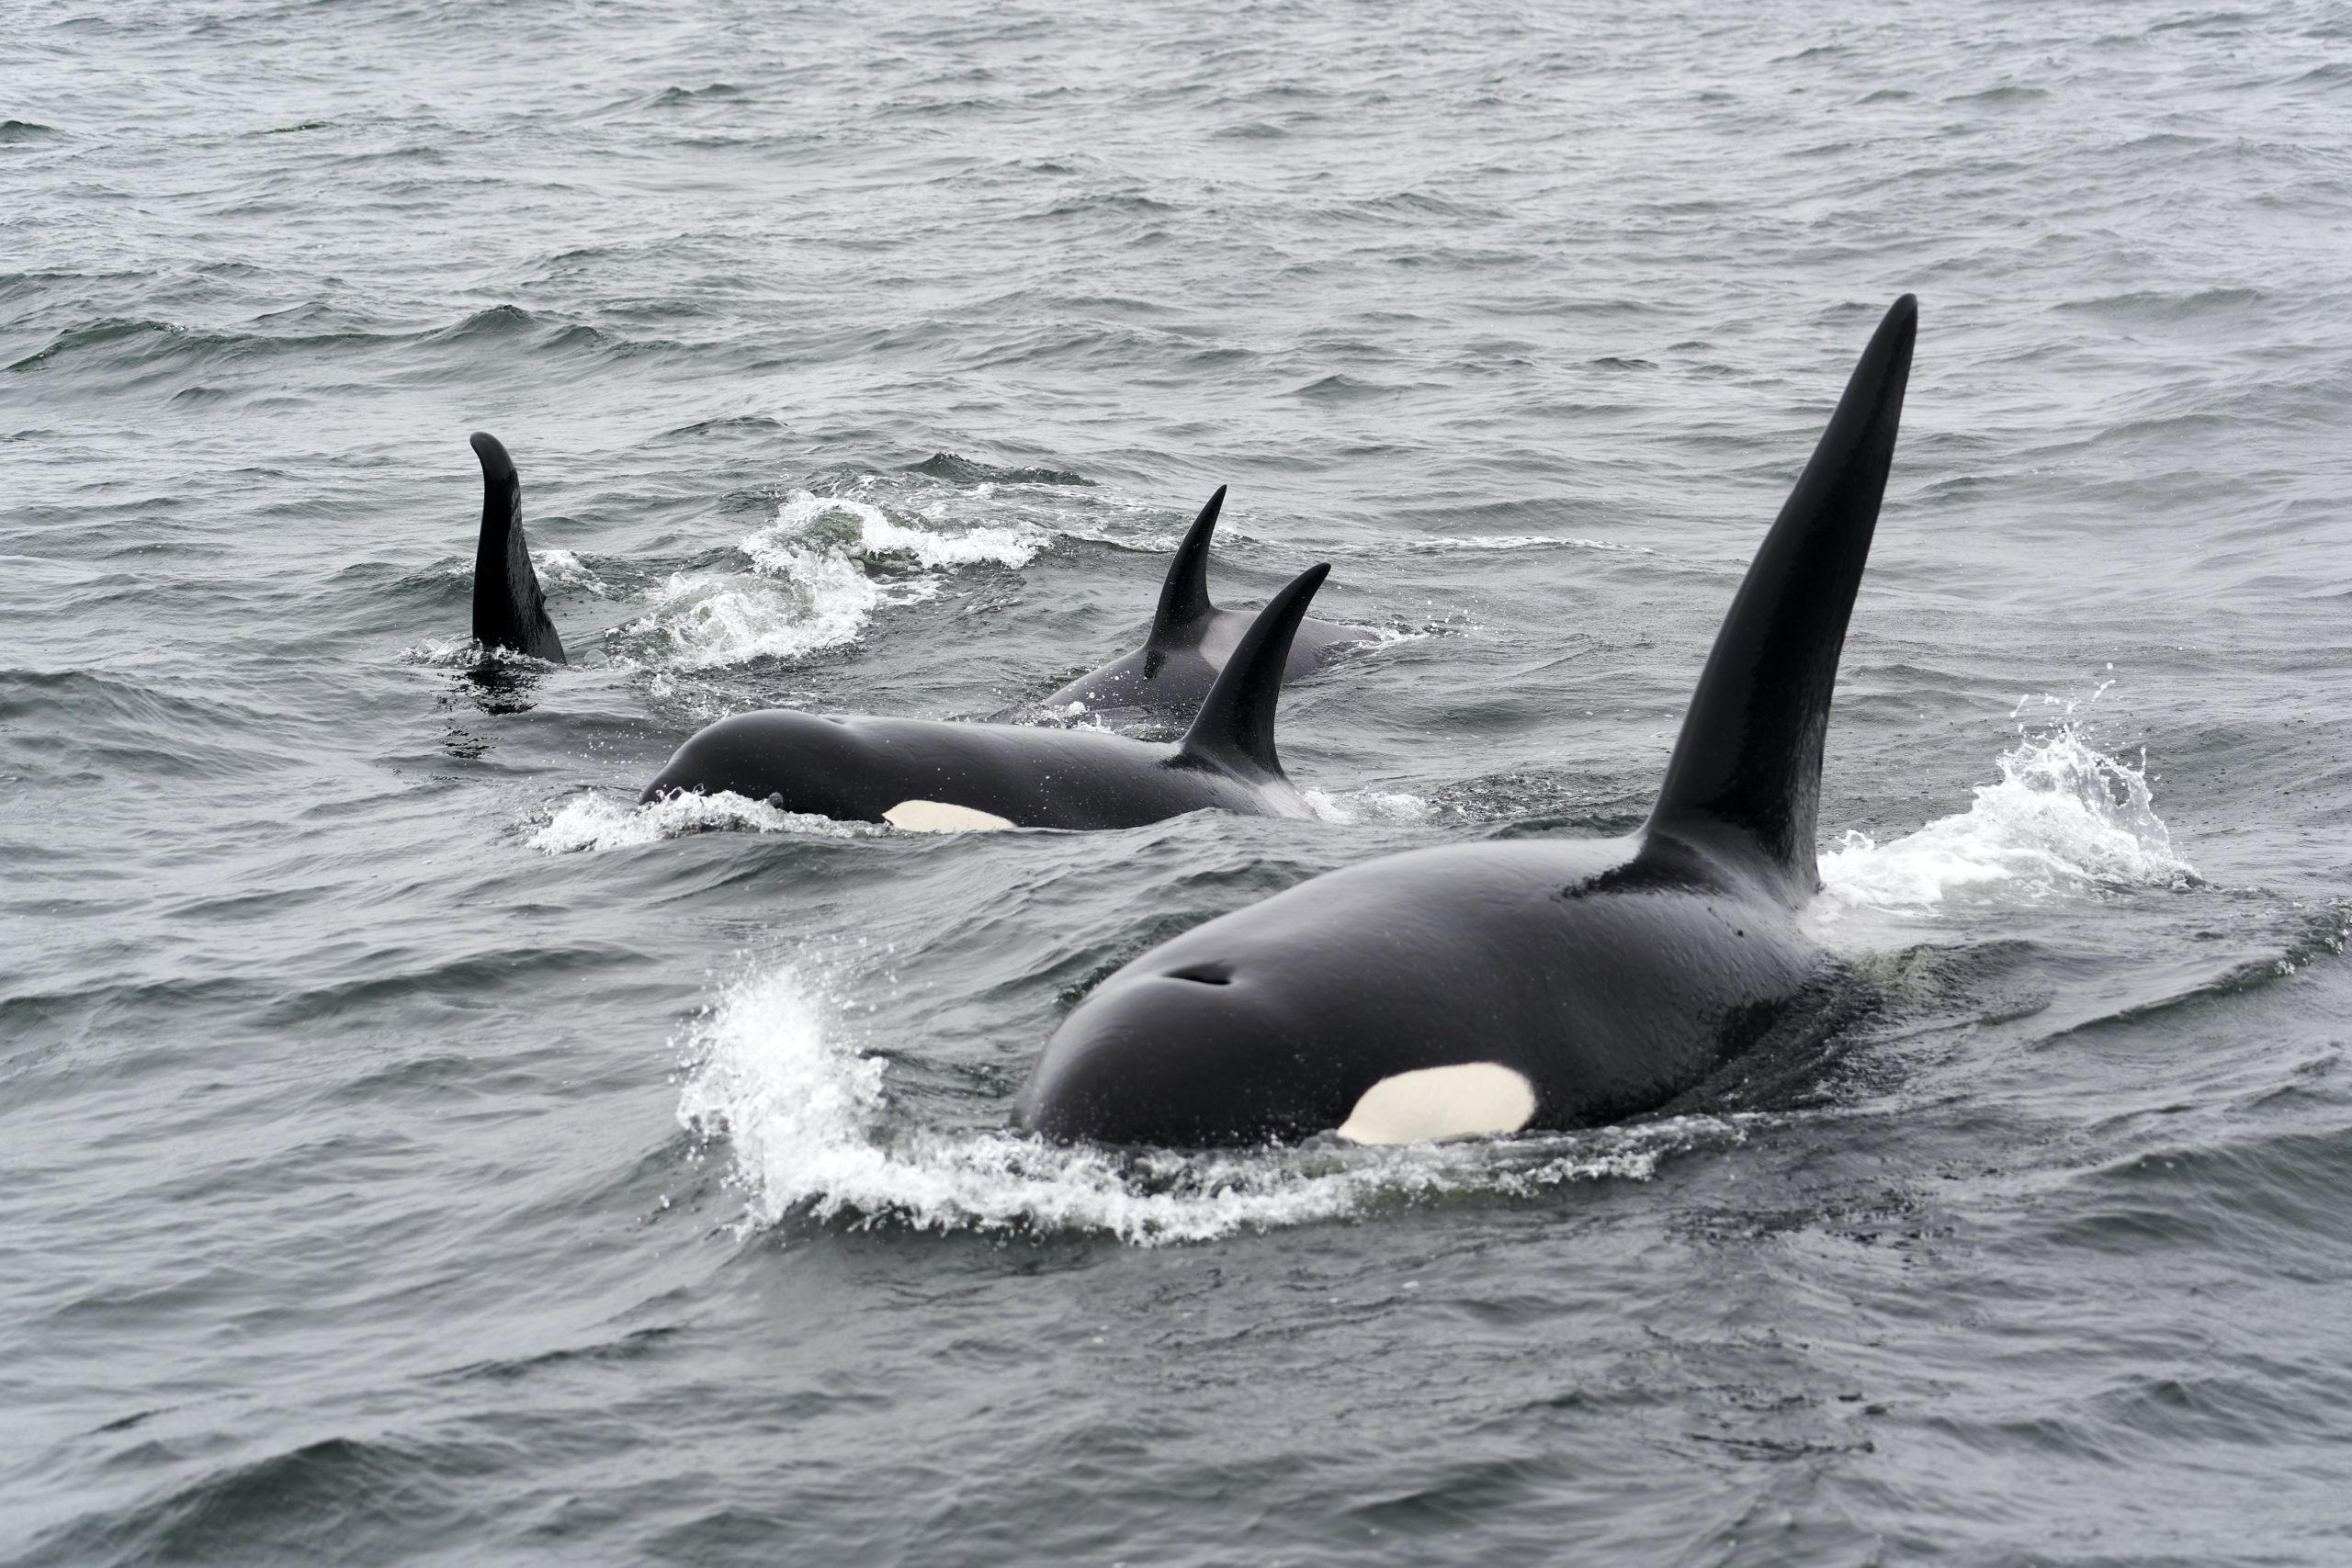 Why are killer whales so friendly?